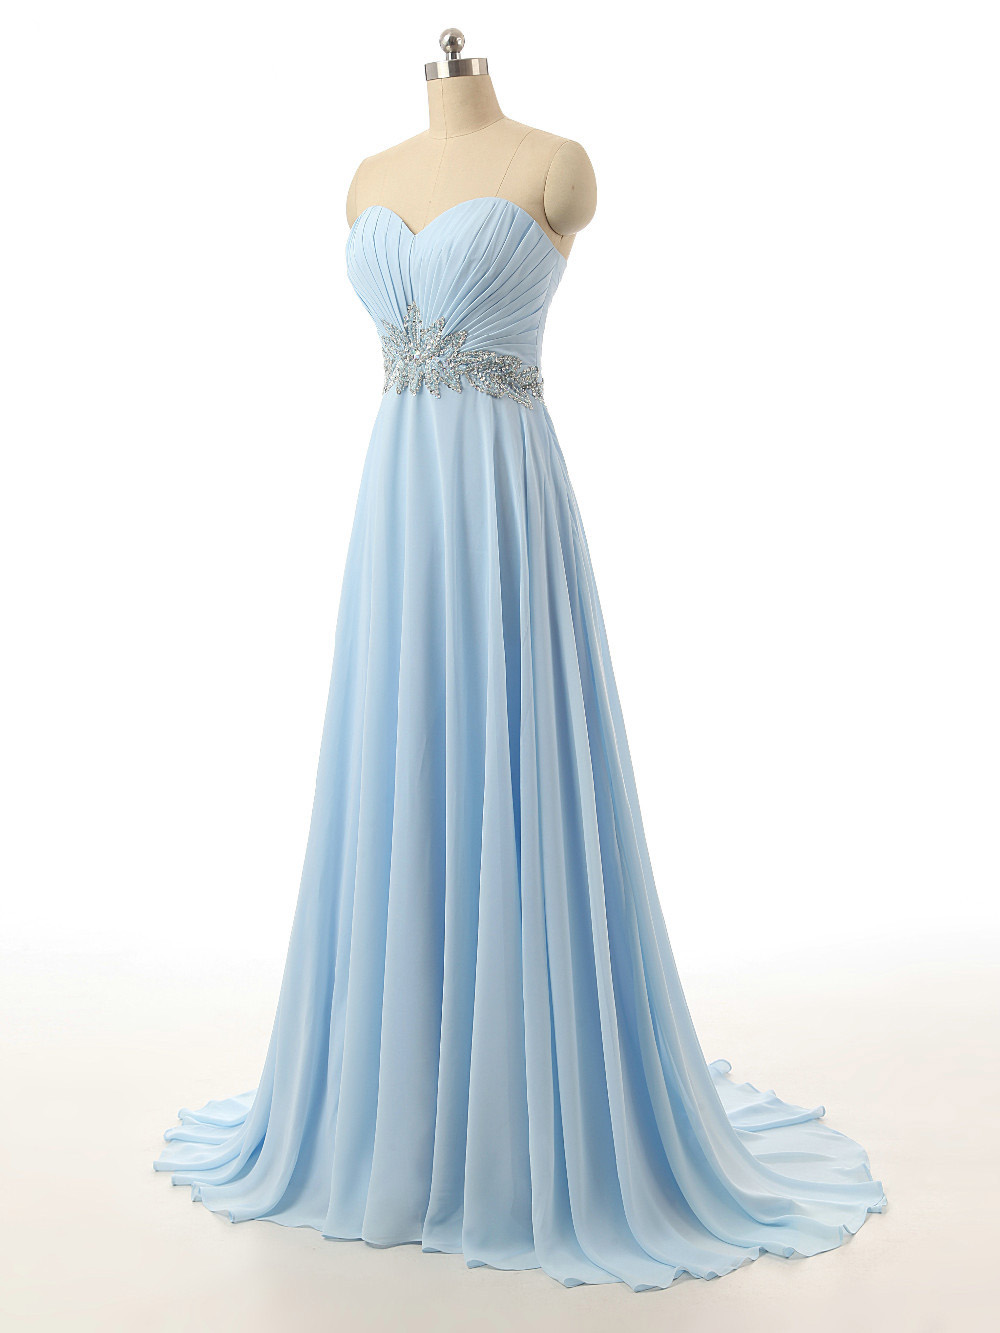 Charming Sweetheart Light Blue Bridesmaid Dresses, Beautiful Floor Length Chiffon Bridesmaid Dresses, Wedding Party Dresses,formal Gowns,prom